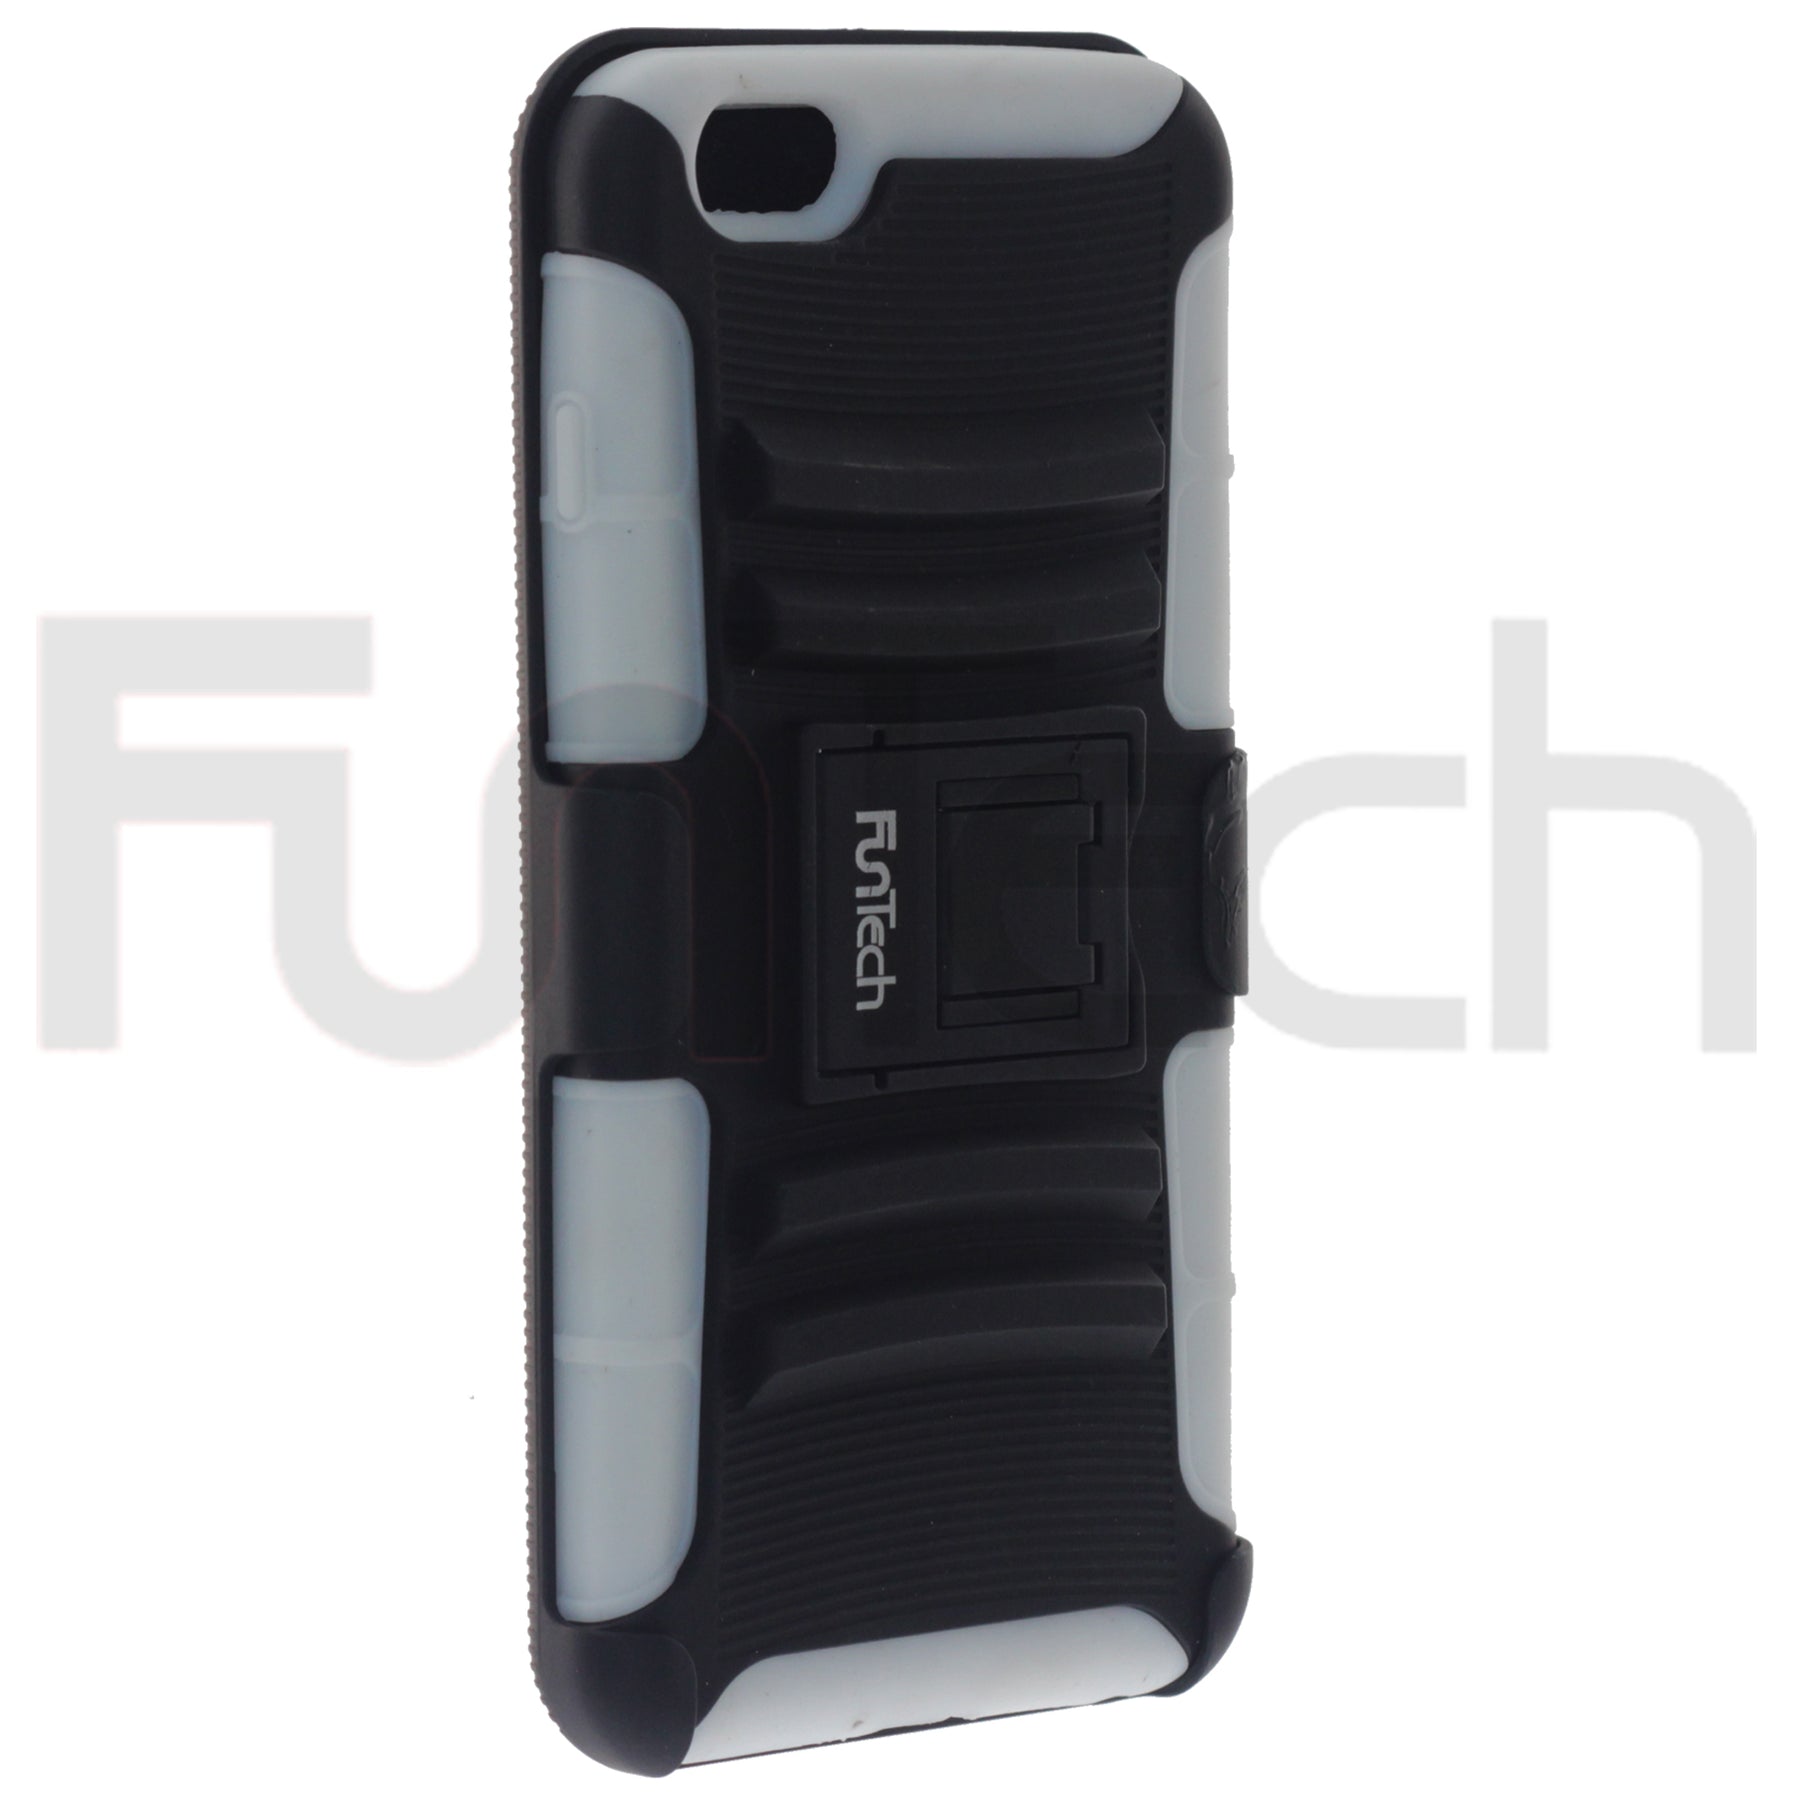 Apple, iPhone 6/6S, 5.5"Rugged Shockproofl Case with Beltclip, Color White/Black.